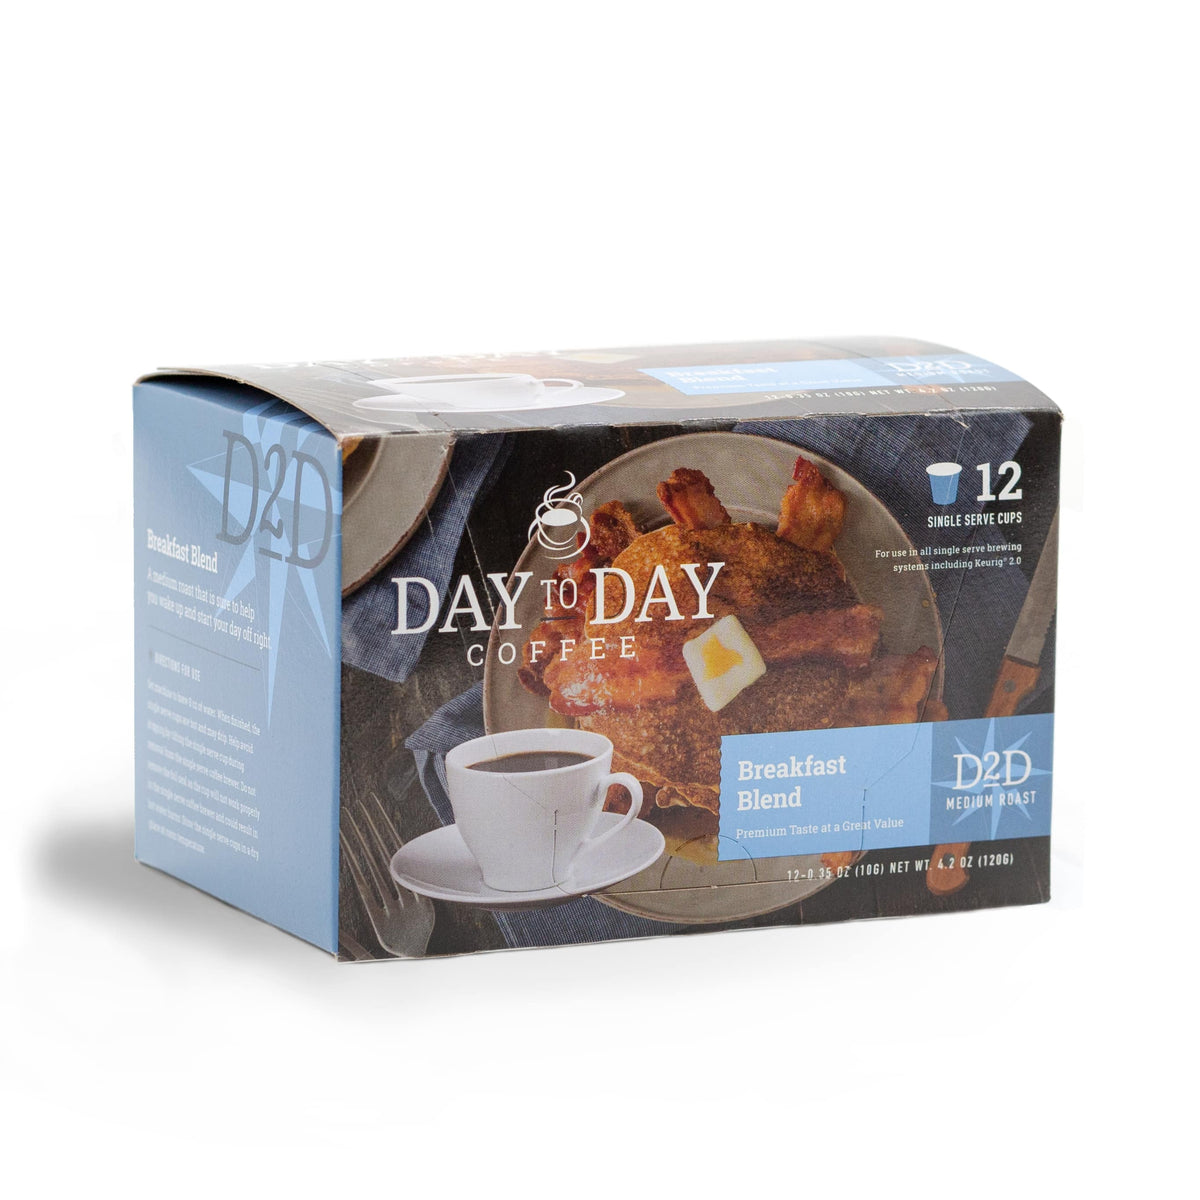 Day to day coffee 12 count breakfast blend medium roast  coffee pods for single serve coffee brewer 